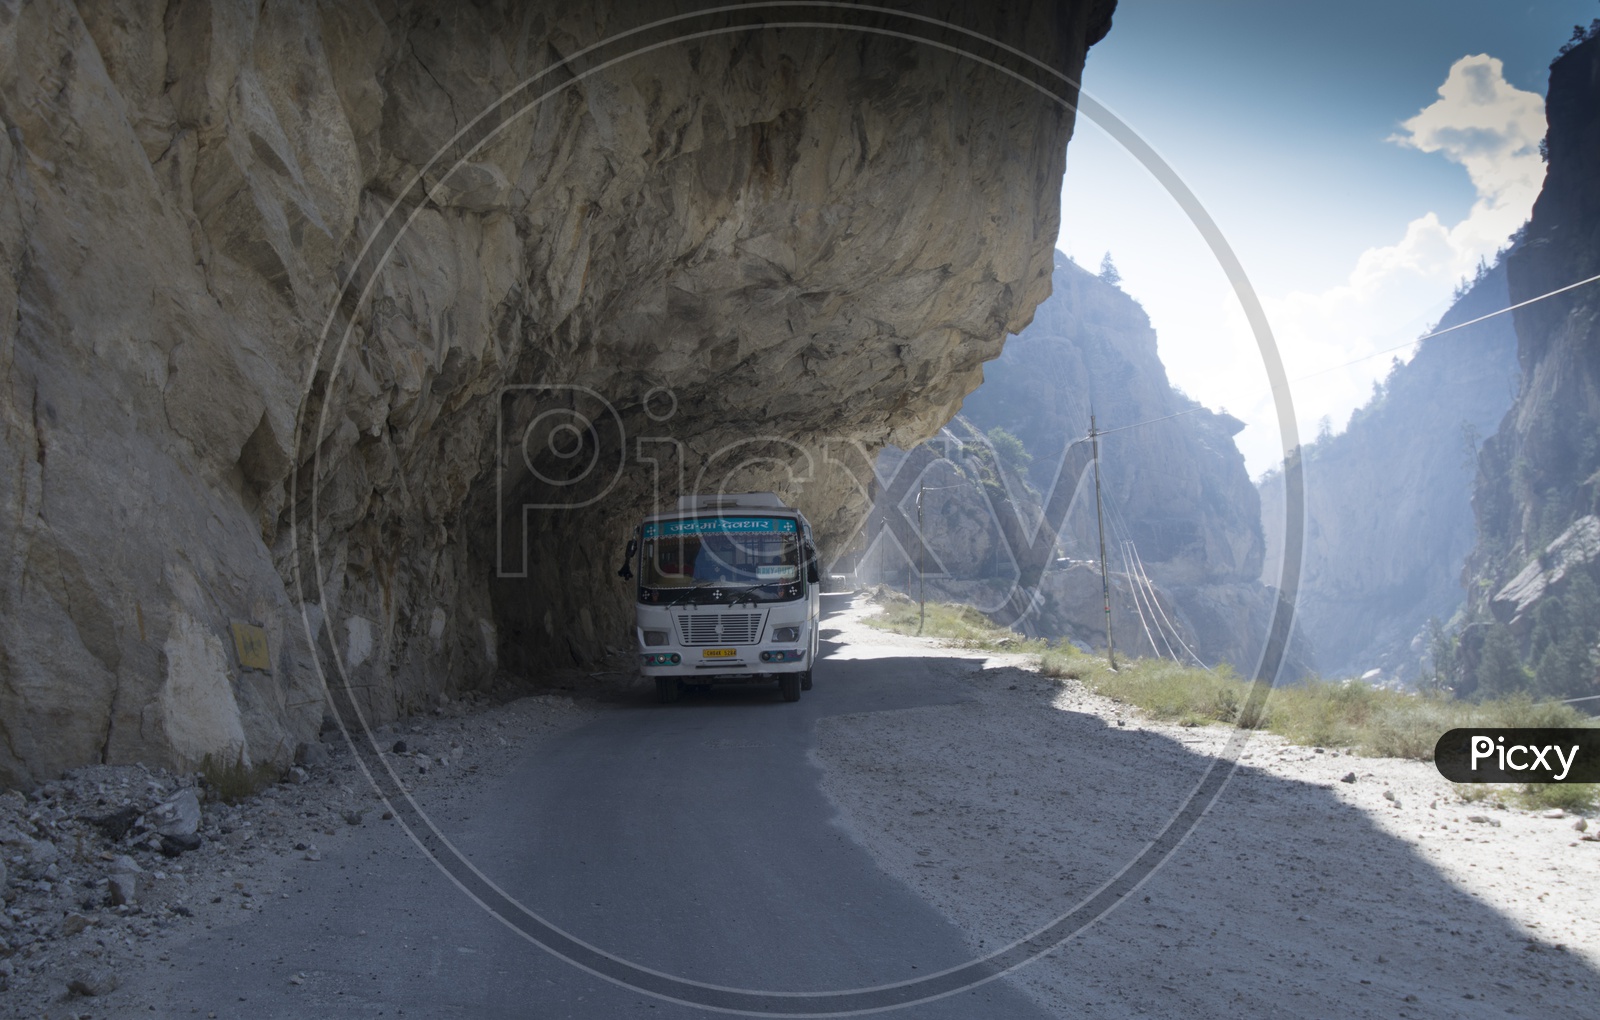 Himachal Pradesh State Road Transport Buses On the Ghat Roads Of Ladakh